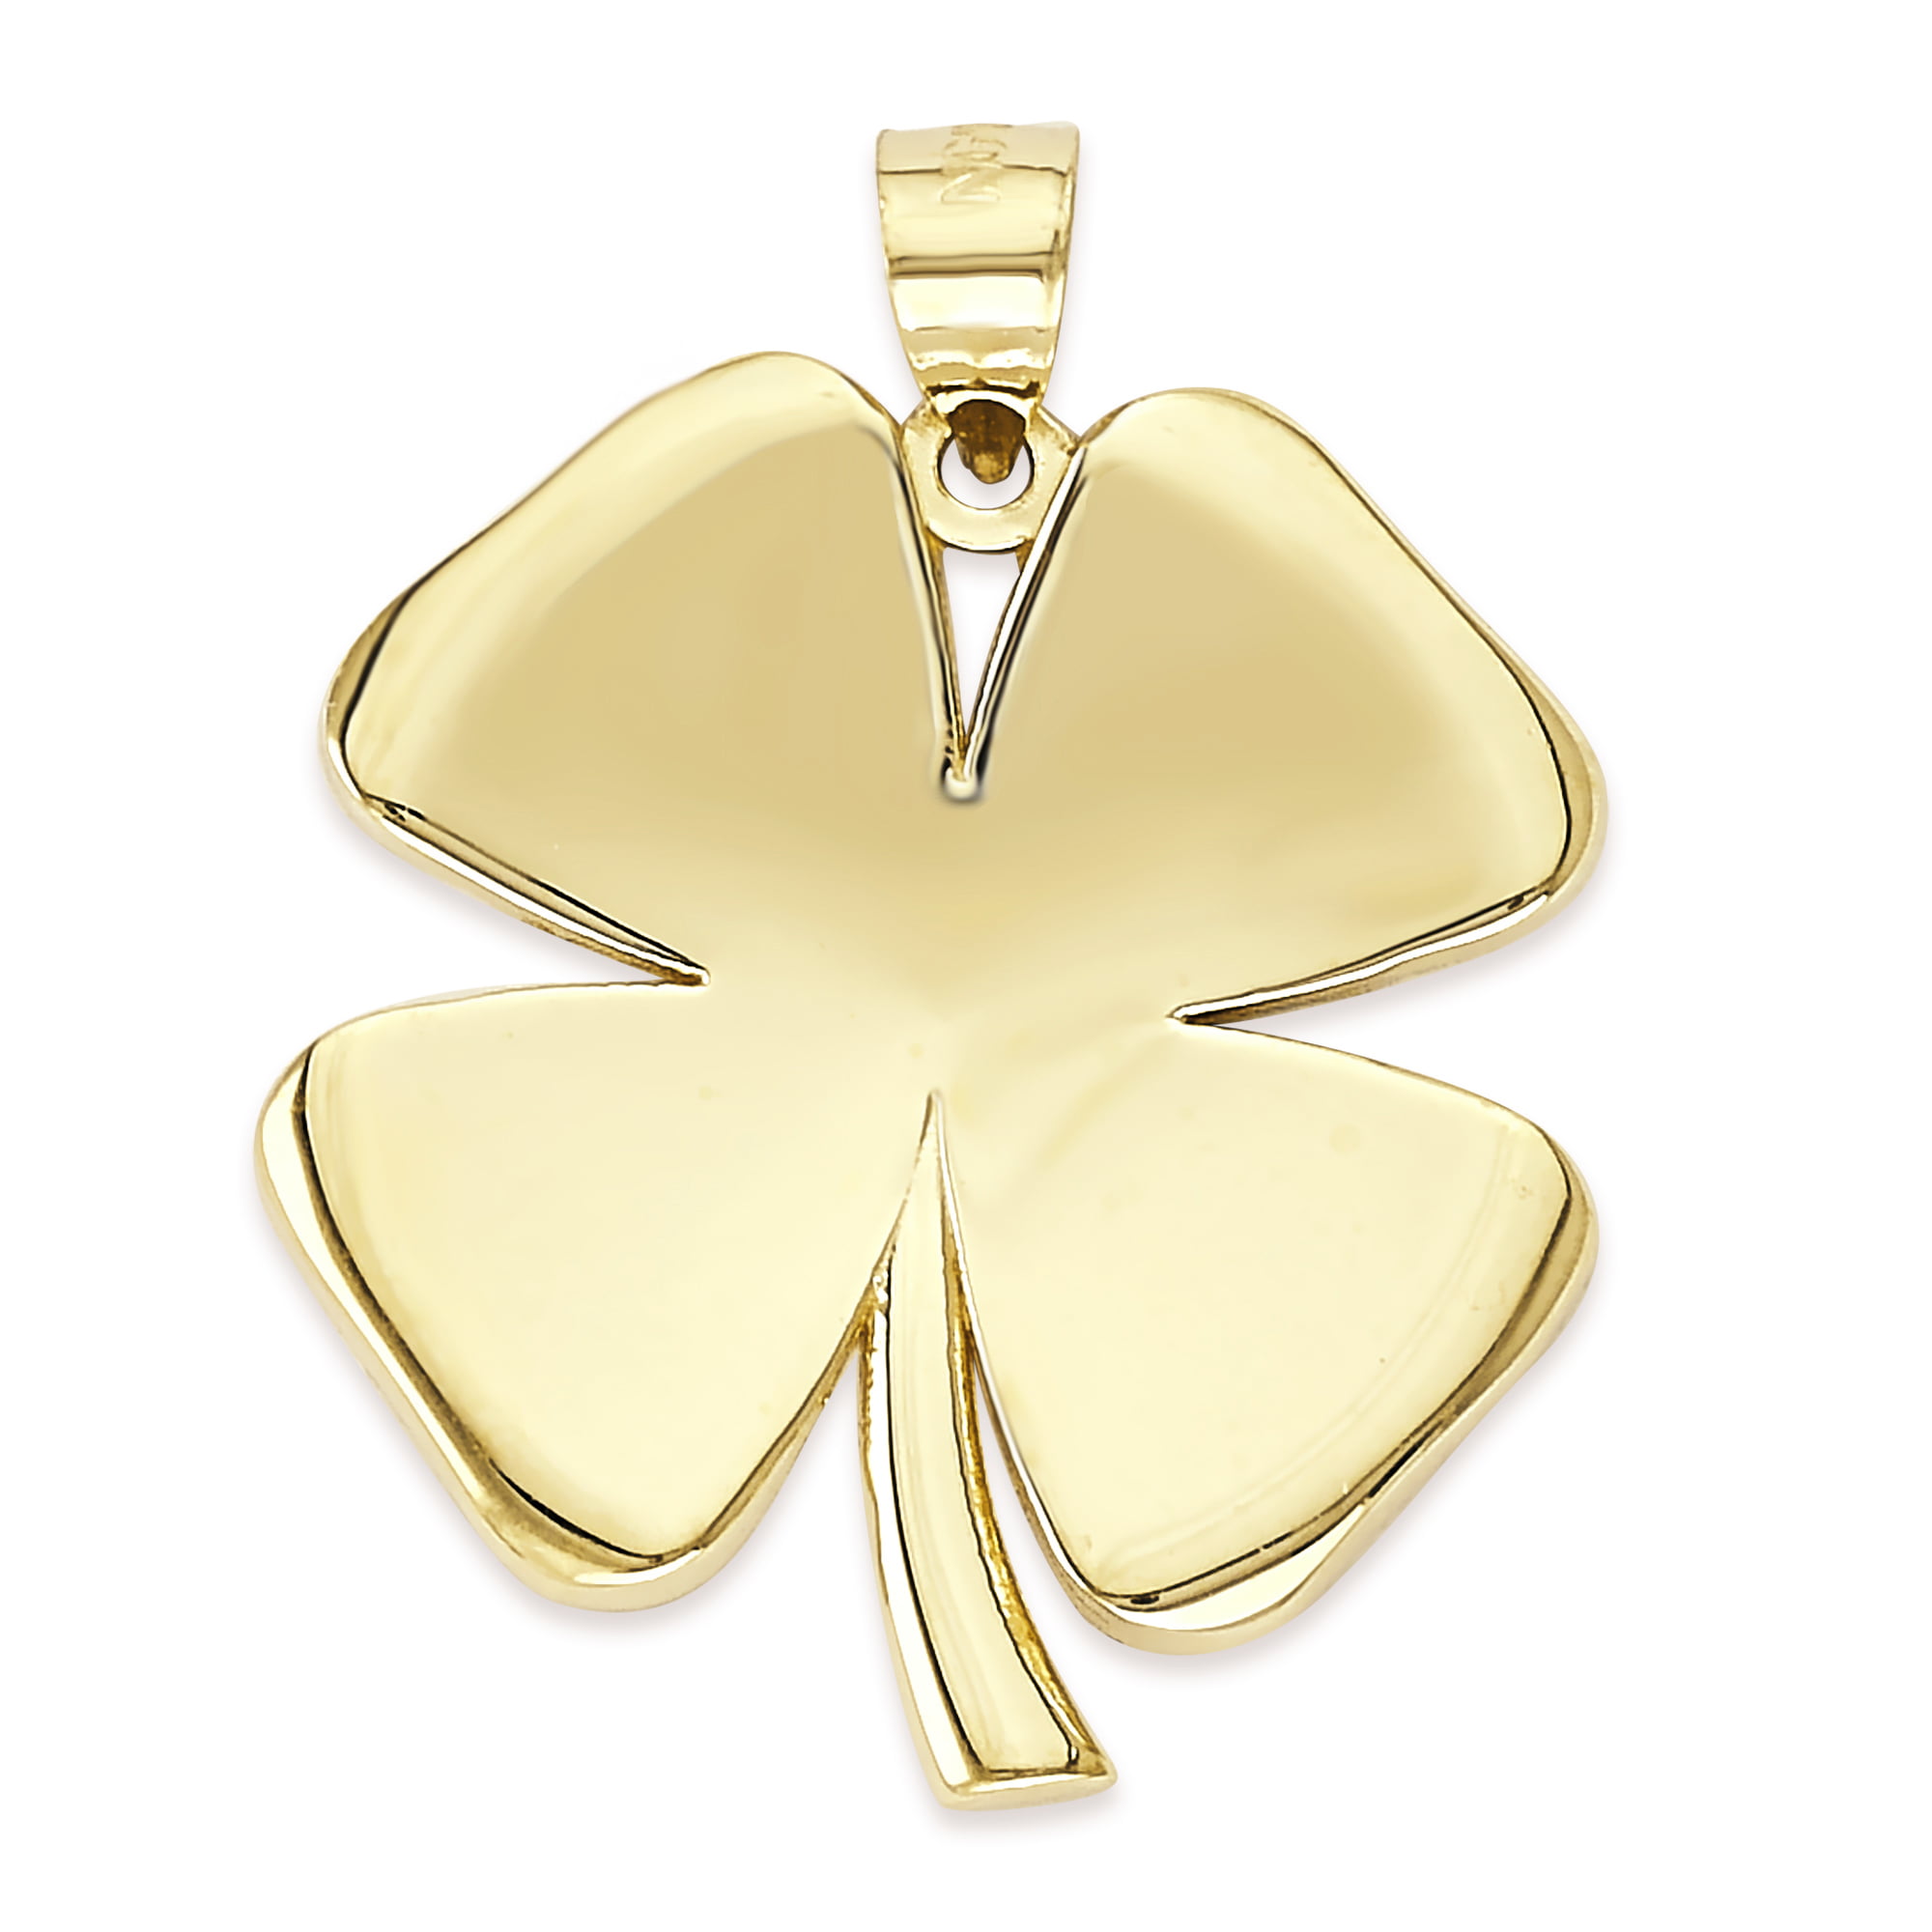 Real 5 five Four Leaf Clover Irish Good Luck Charms Wedding Favors Gifts Coated 